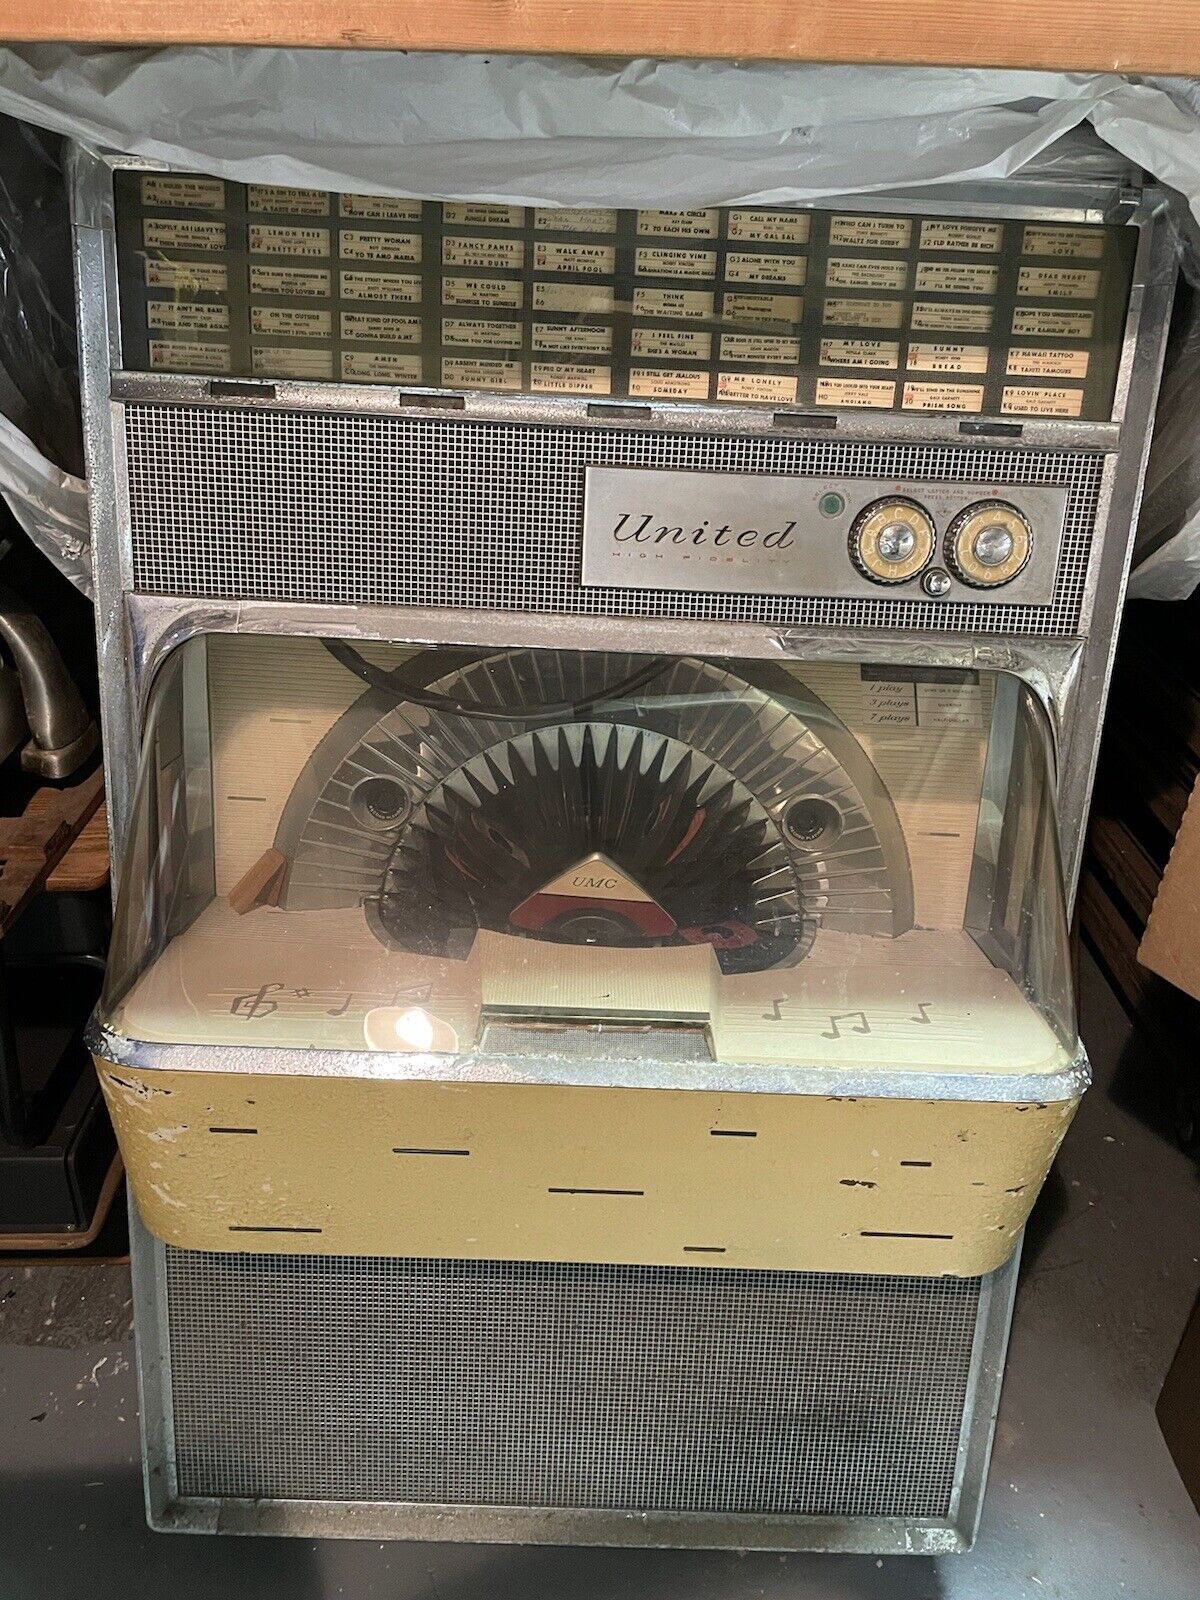 United Jukebox Model Upb-100 Circa 1959. Complete Record Library, Functional